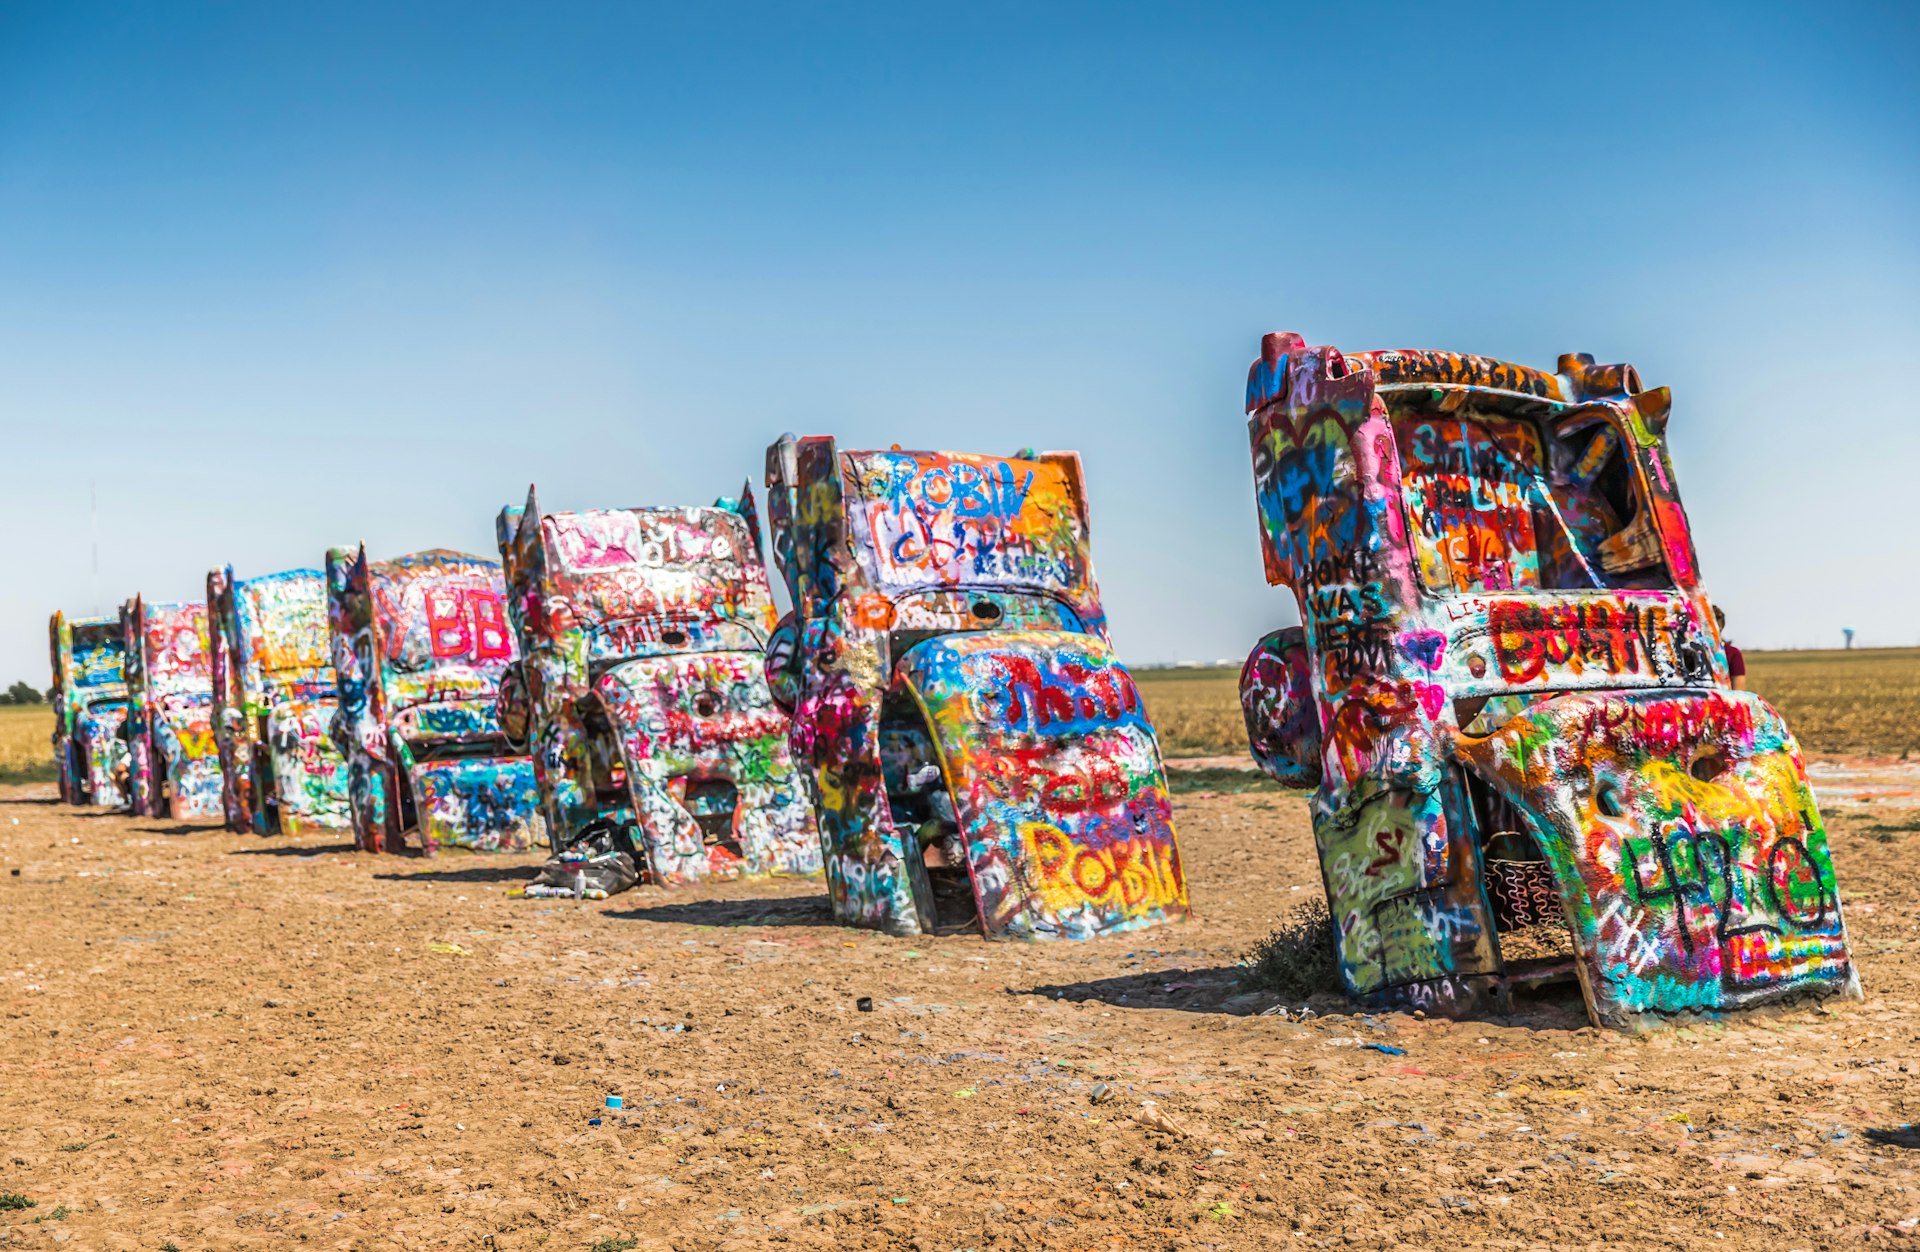 Brightly painted Cadillacs are buried head first in the ground at Cadillac Ranch, Amarillo, Texas, USA